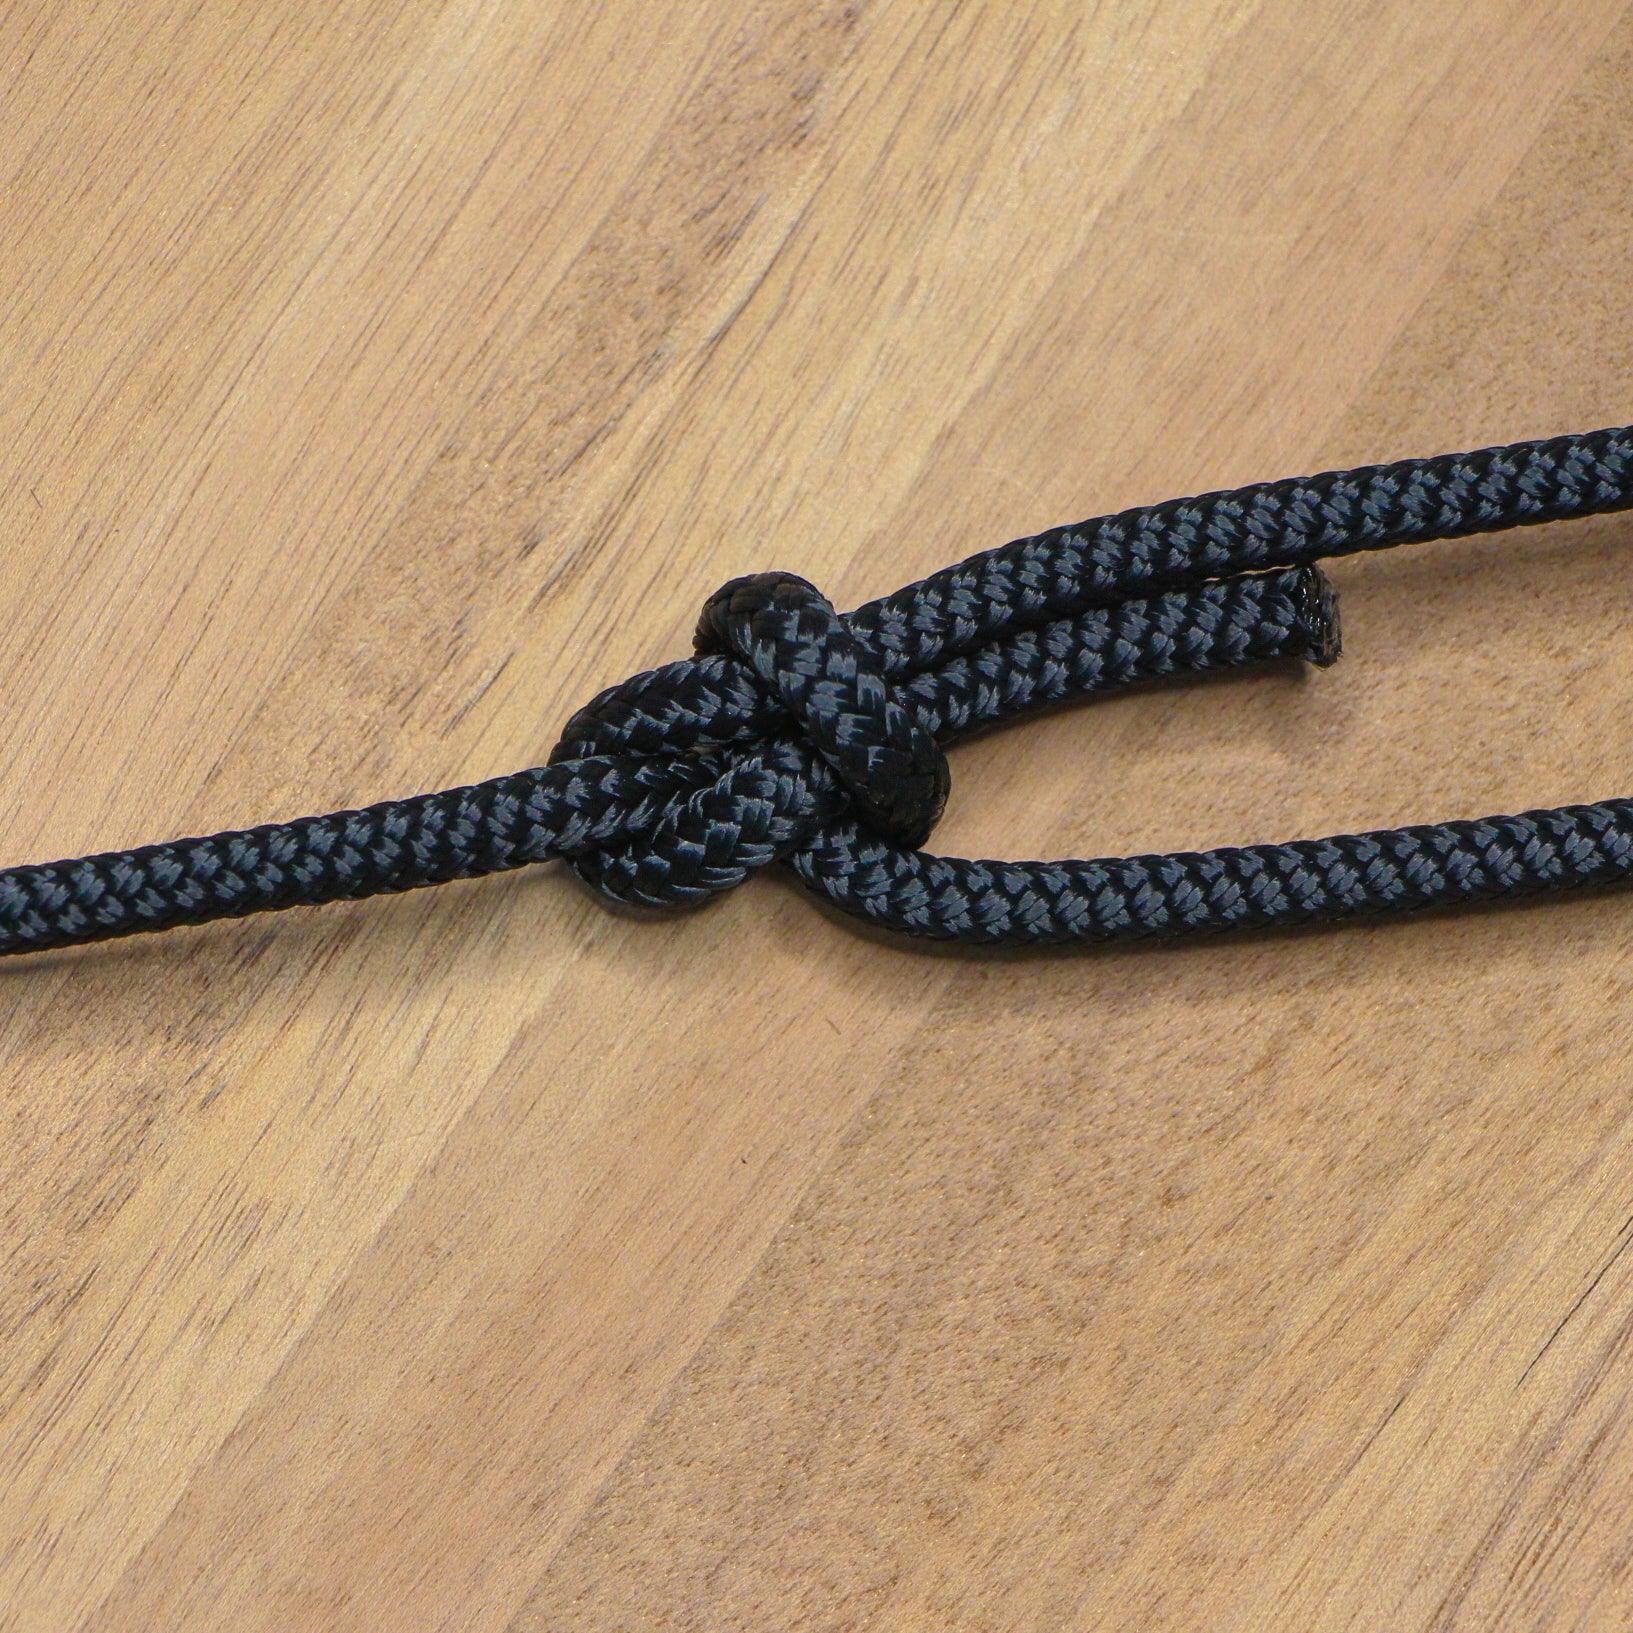 10mm Braided Yacht Rope Black, Ropes